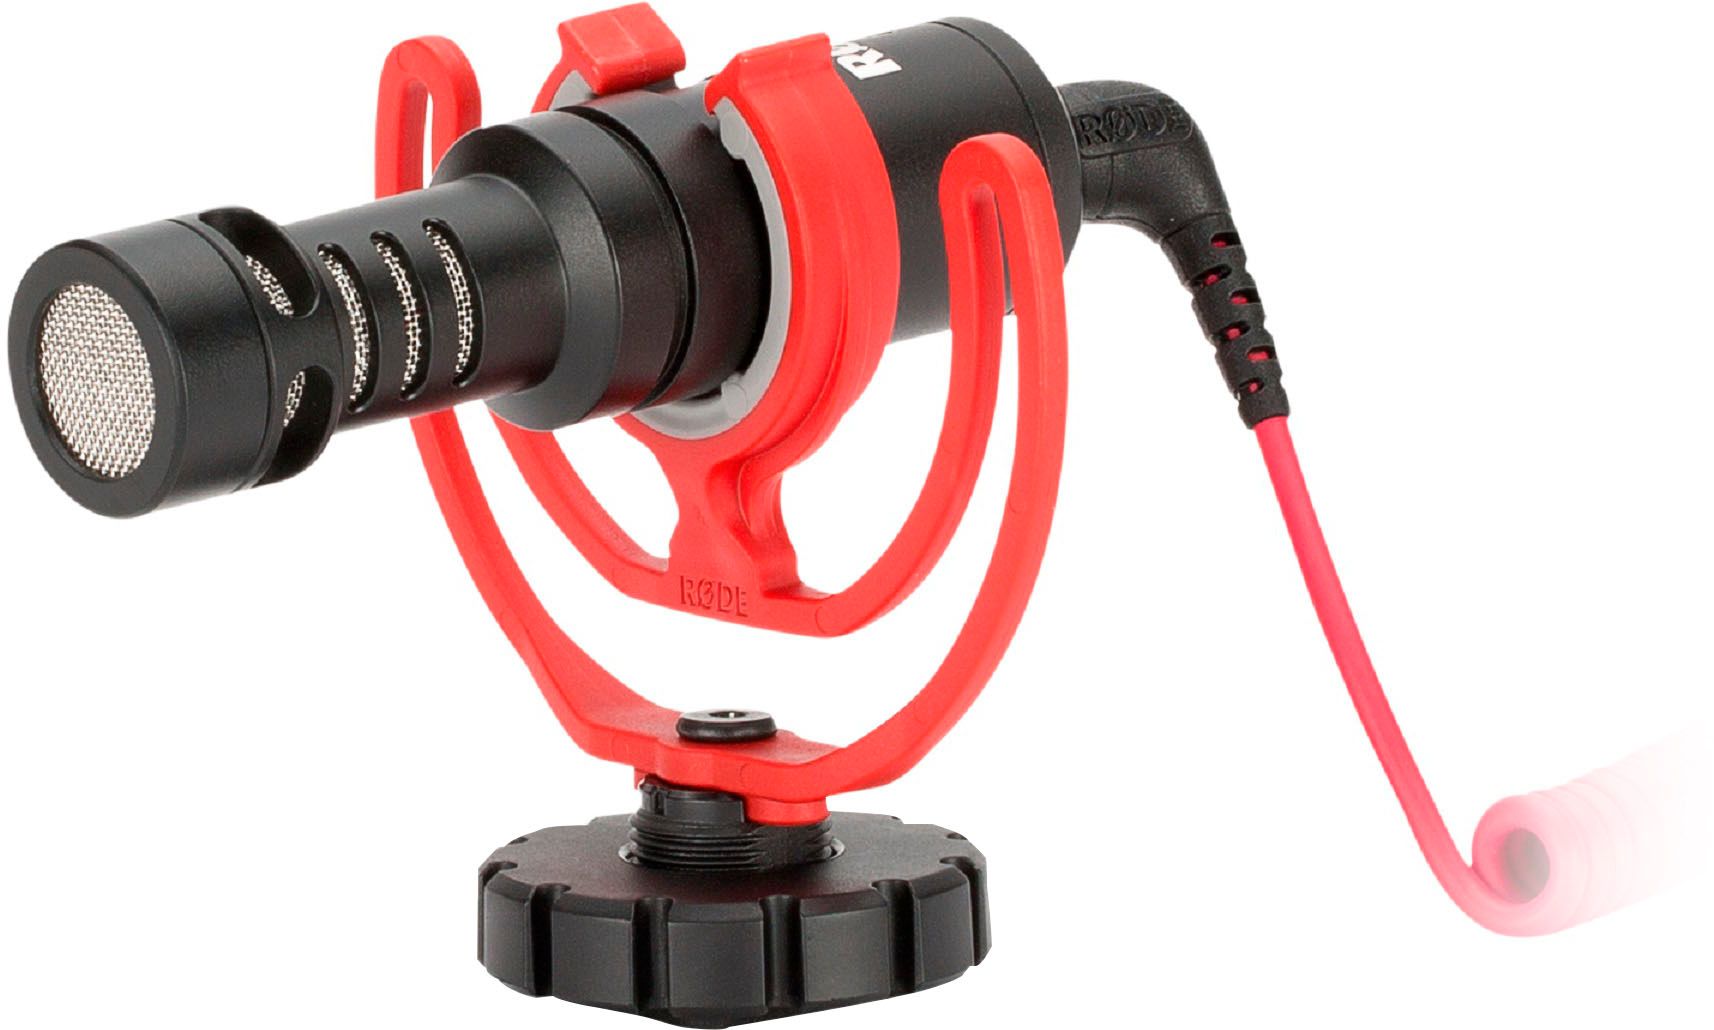 Angle View: RØDE - VIDEOMICRO Compact On-Camera Microphone